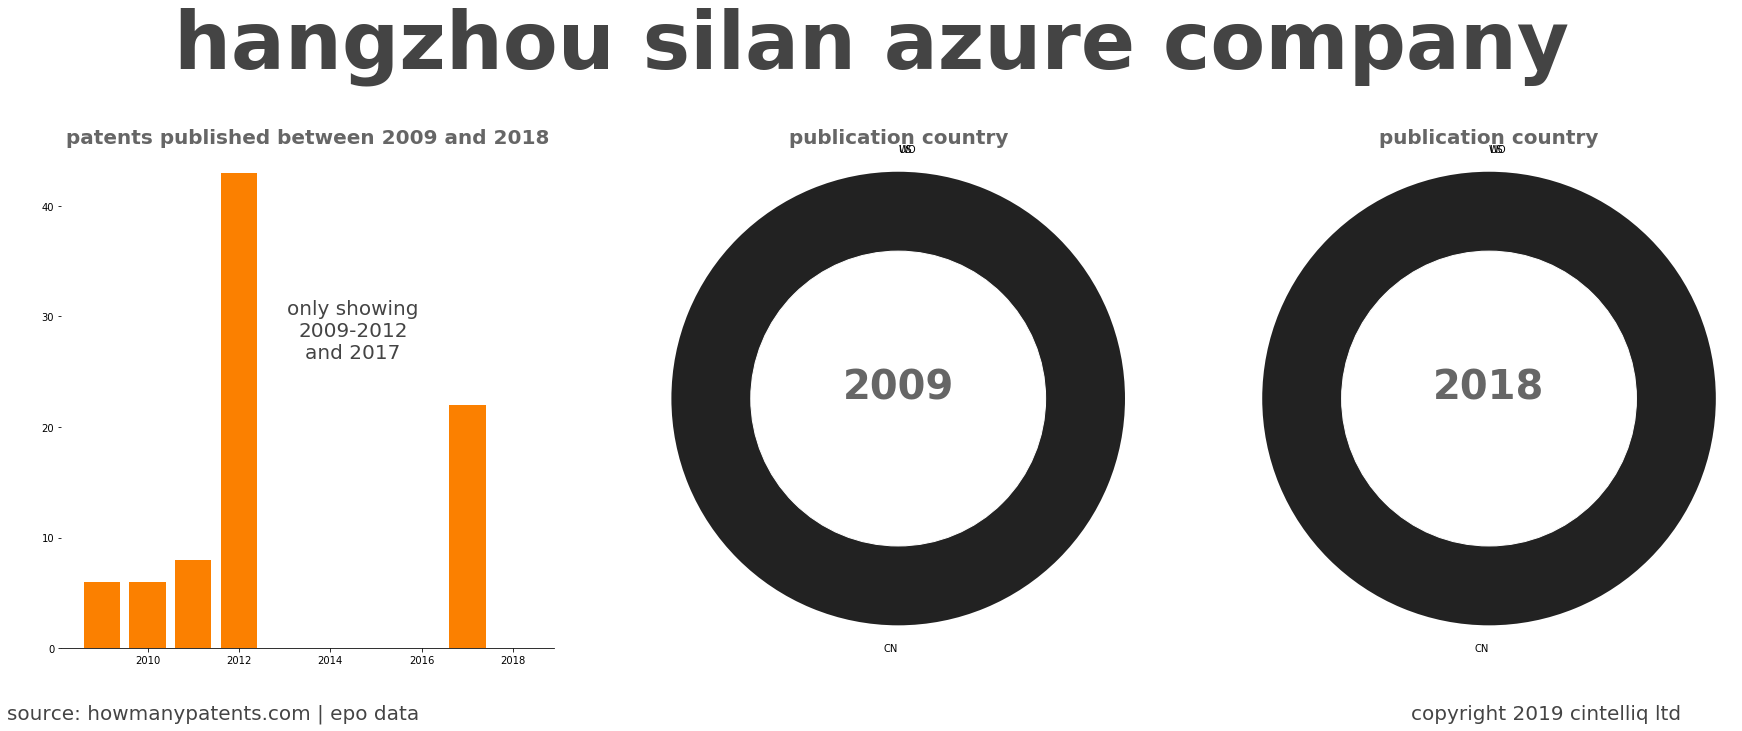 summary of patents for Hangzhou Silan Azure Company